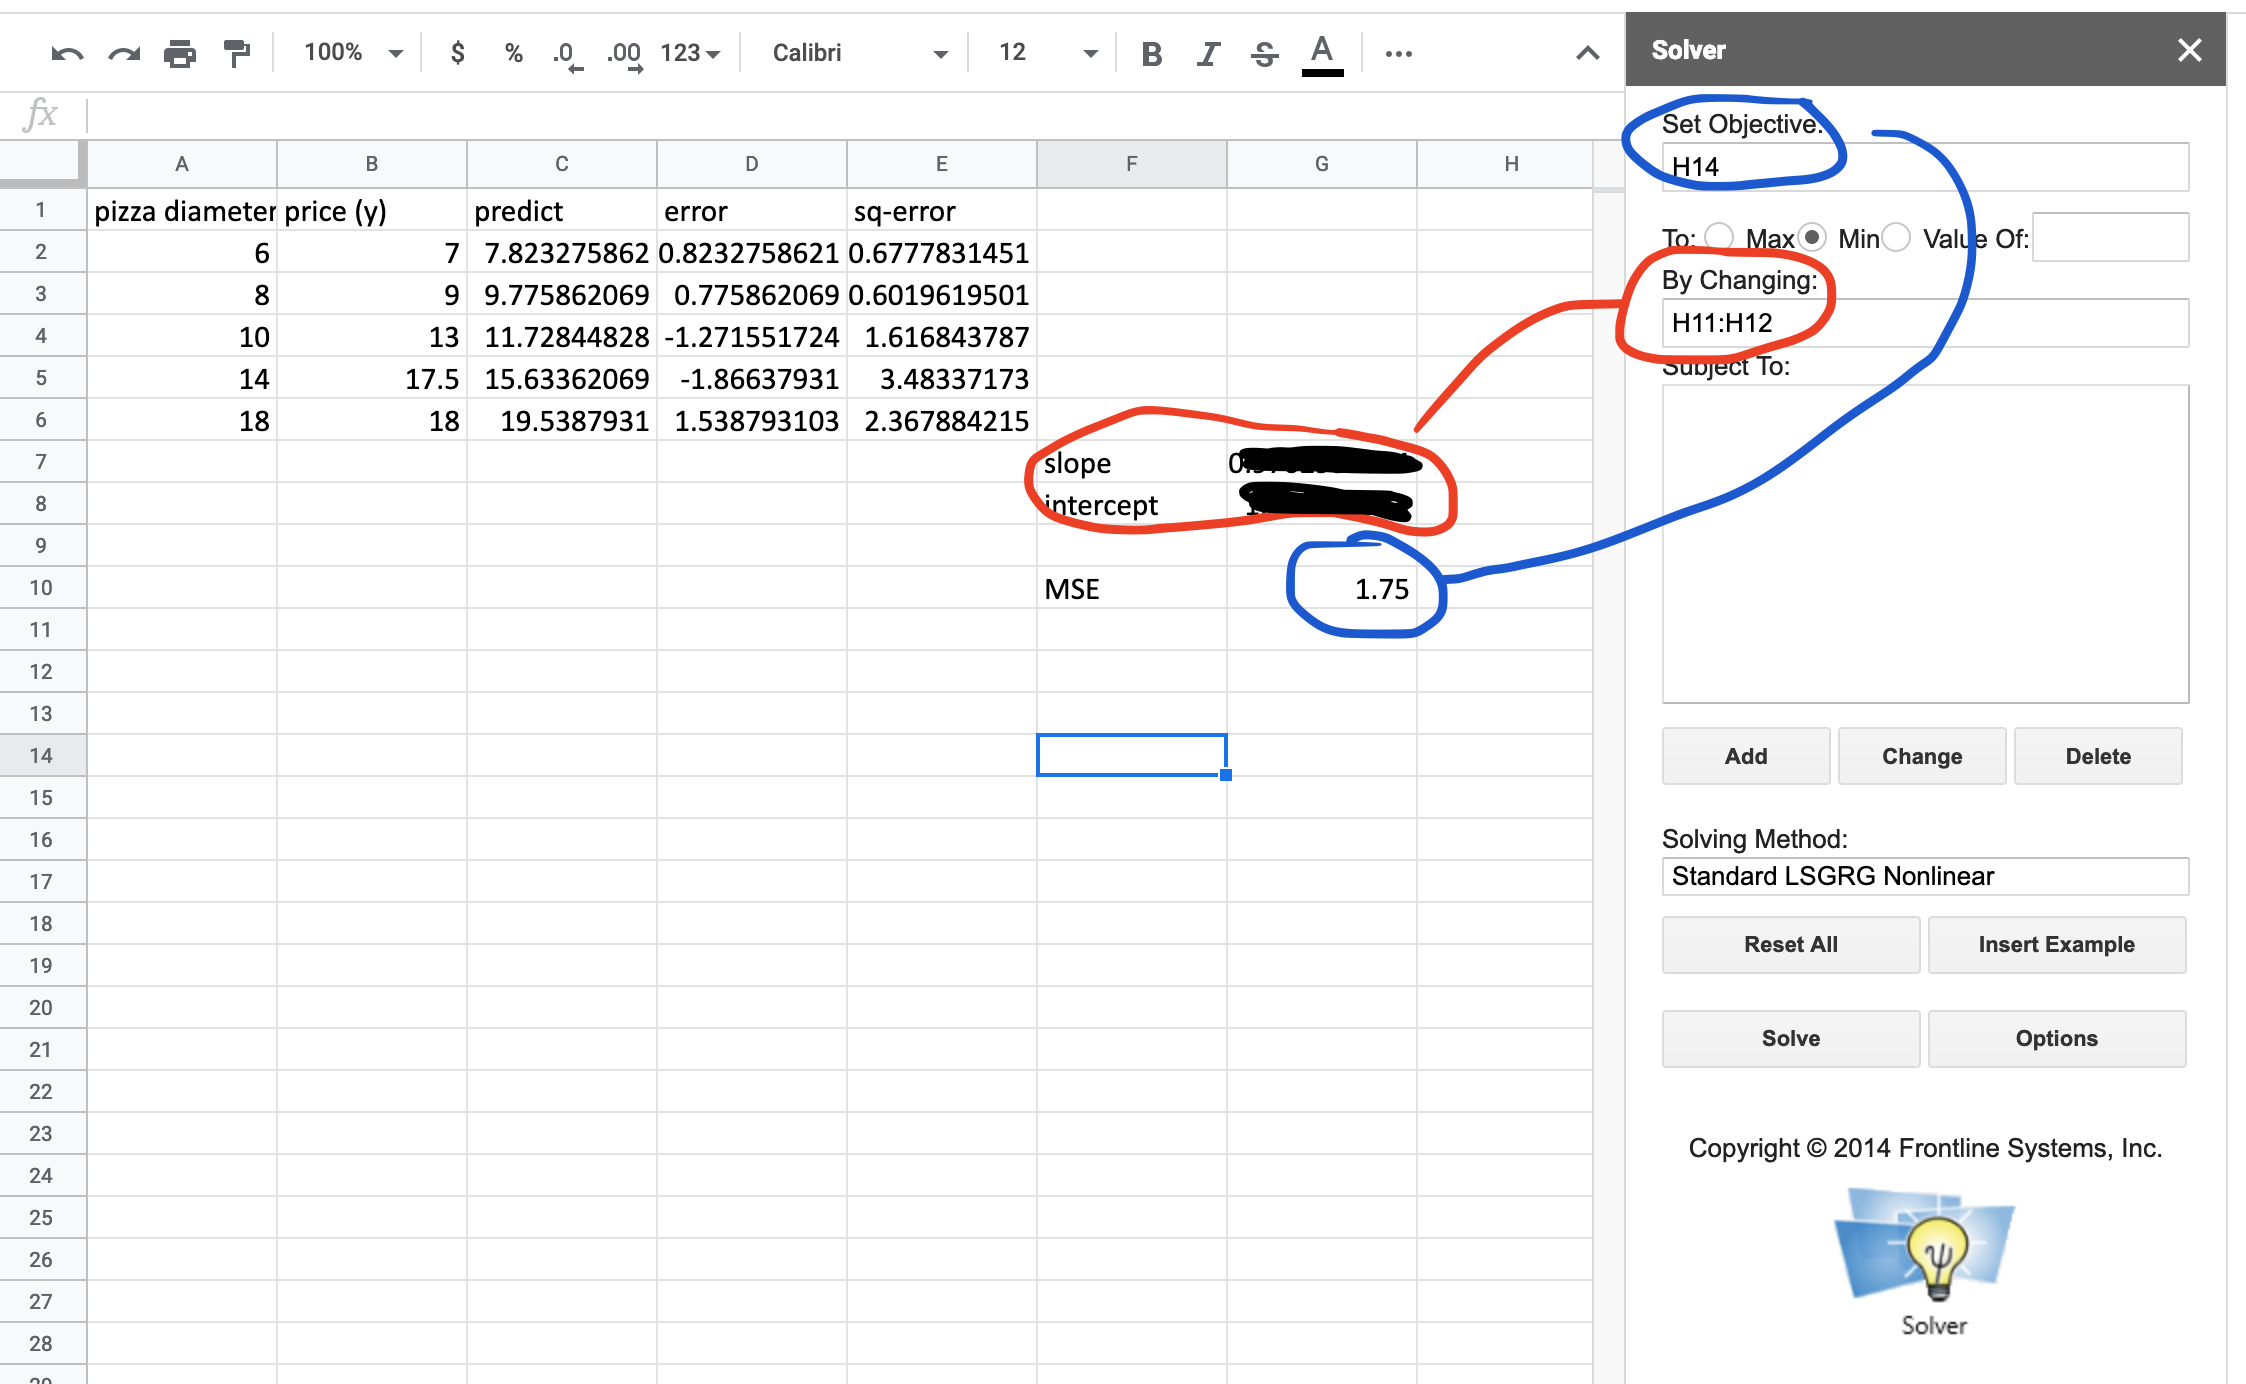 Screen capture of Google Sheets with Solver add-on being used to calculate the slope and intercept by minimizing the MSE.